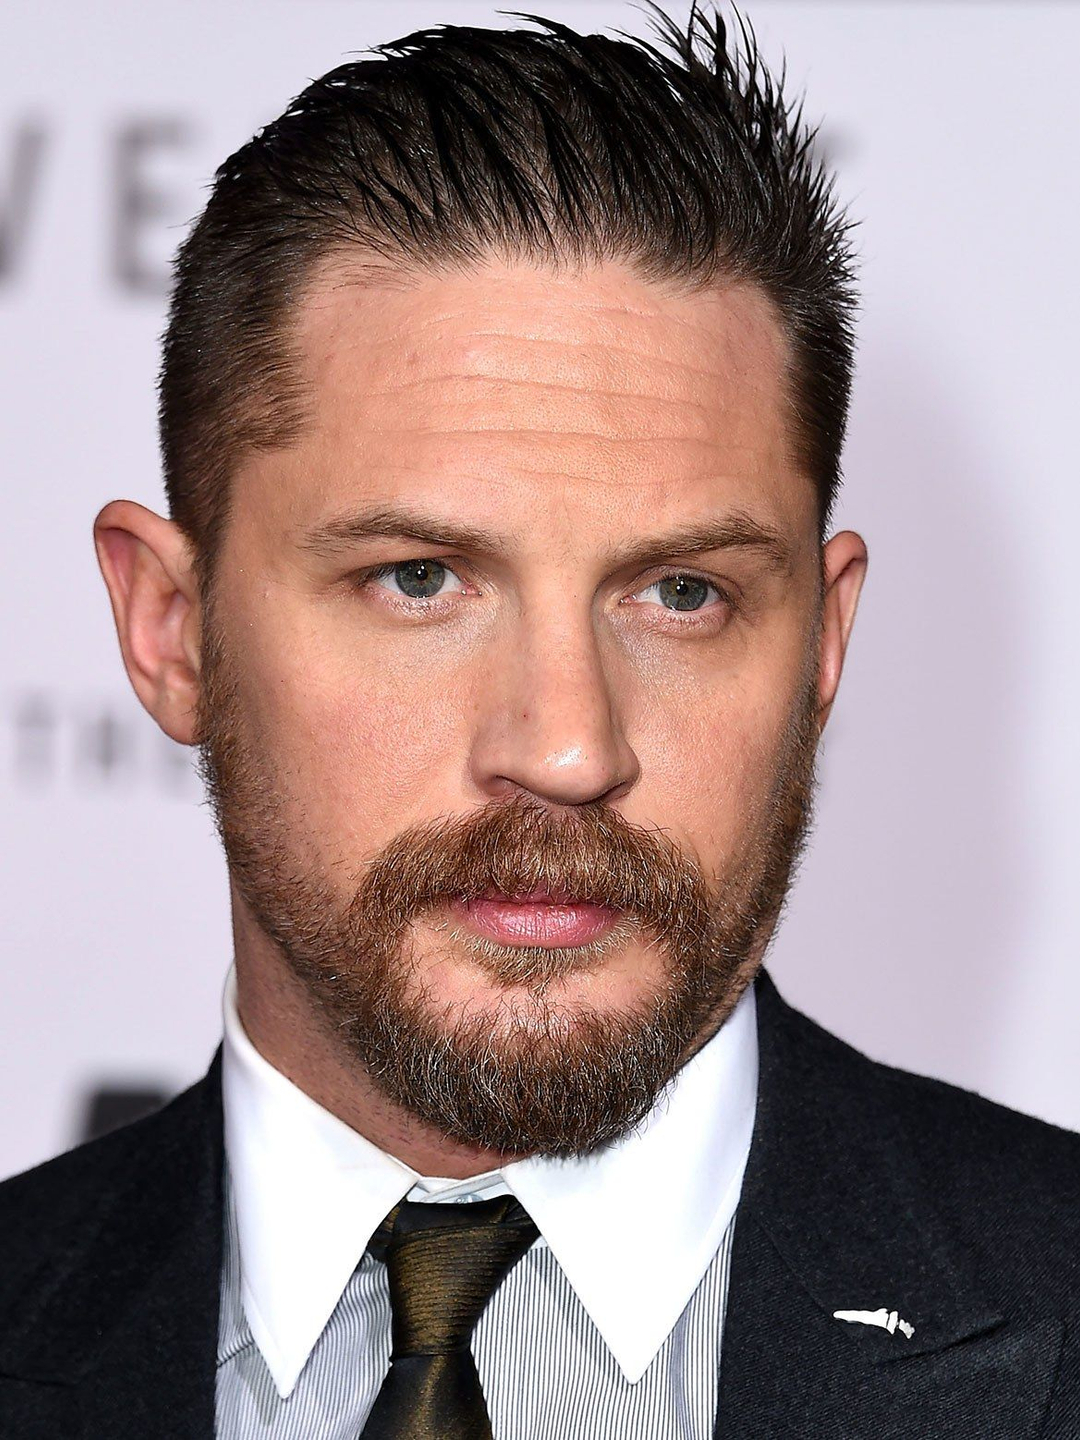 Tom Hardy how did he became famous